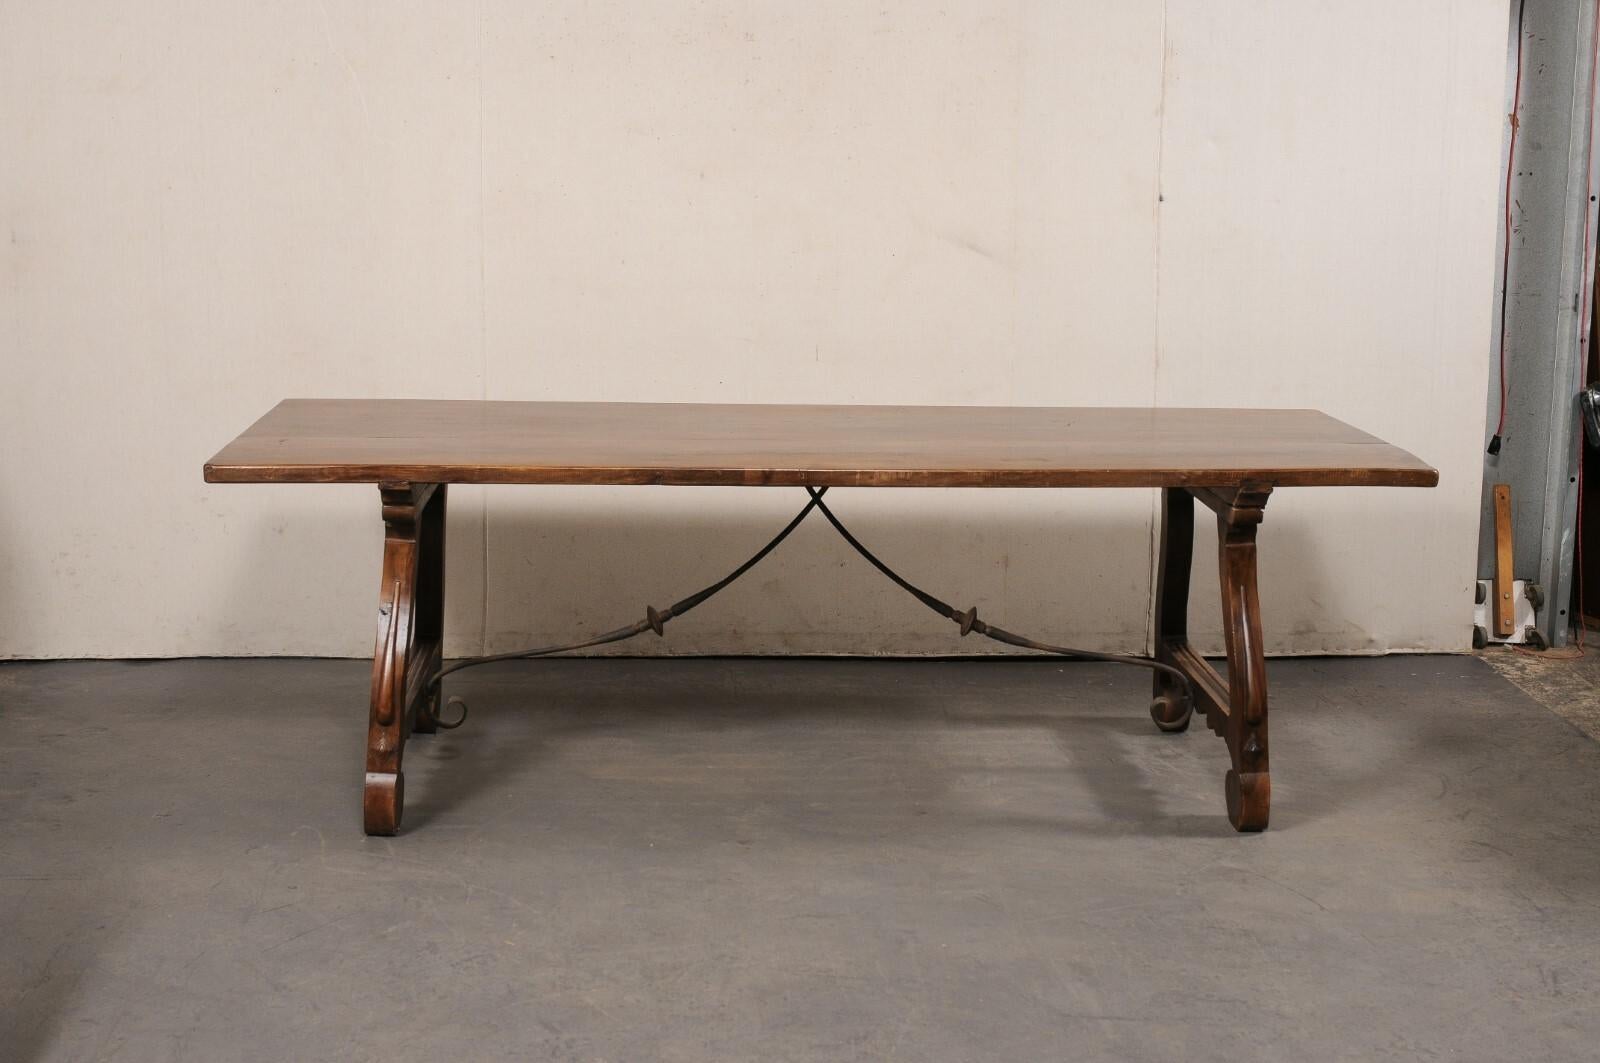 Spanish Carved Walnut Wood Trestle-Leg Table w/Forged Iron Stretcher, 8+ Ft Long For Sale 1